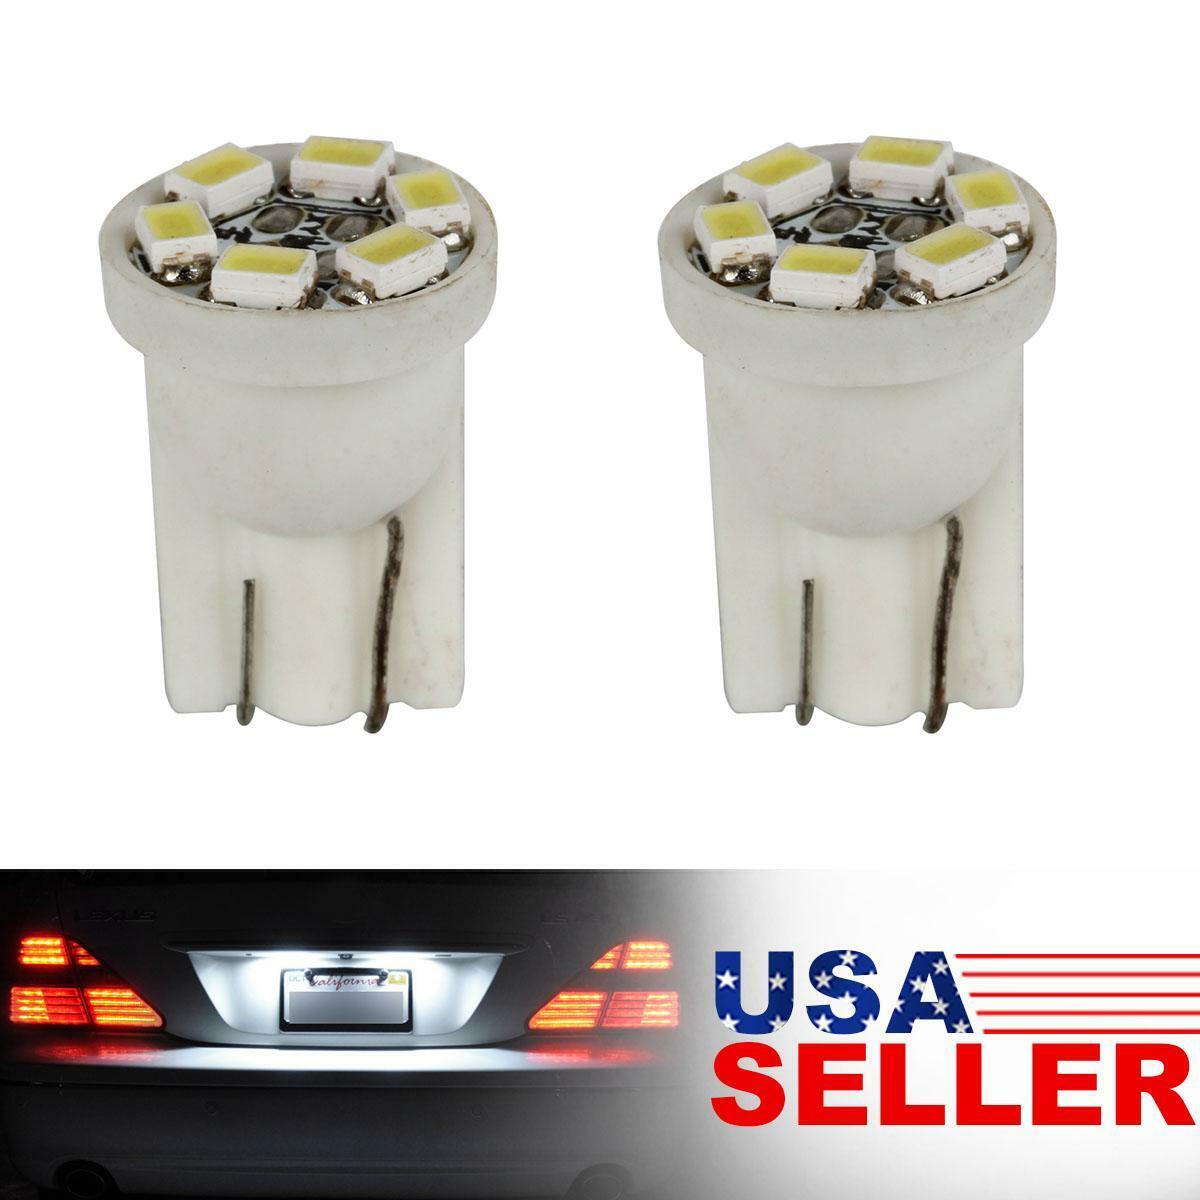 2 x  White 194 2825 168 HID 6 1210 SMD LED Bulbs For License Plate Lights 192